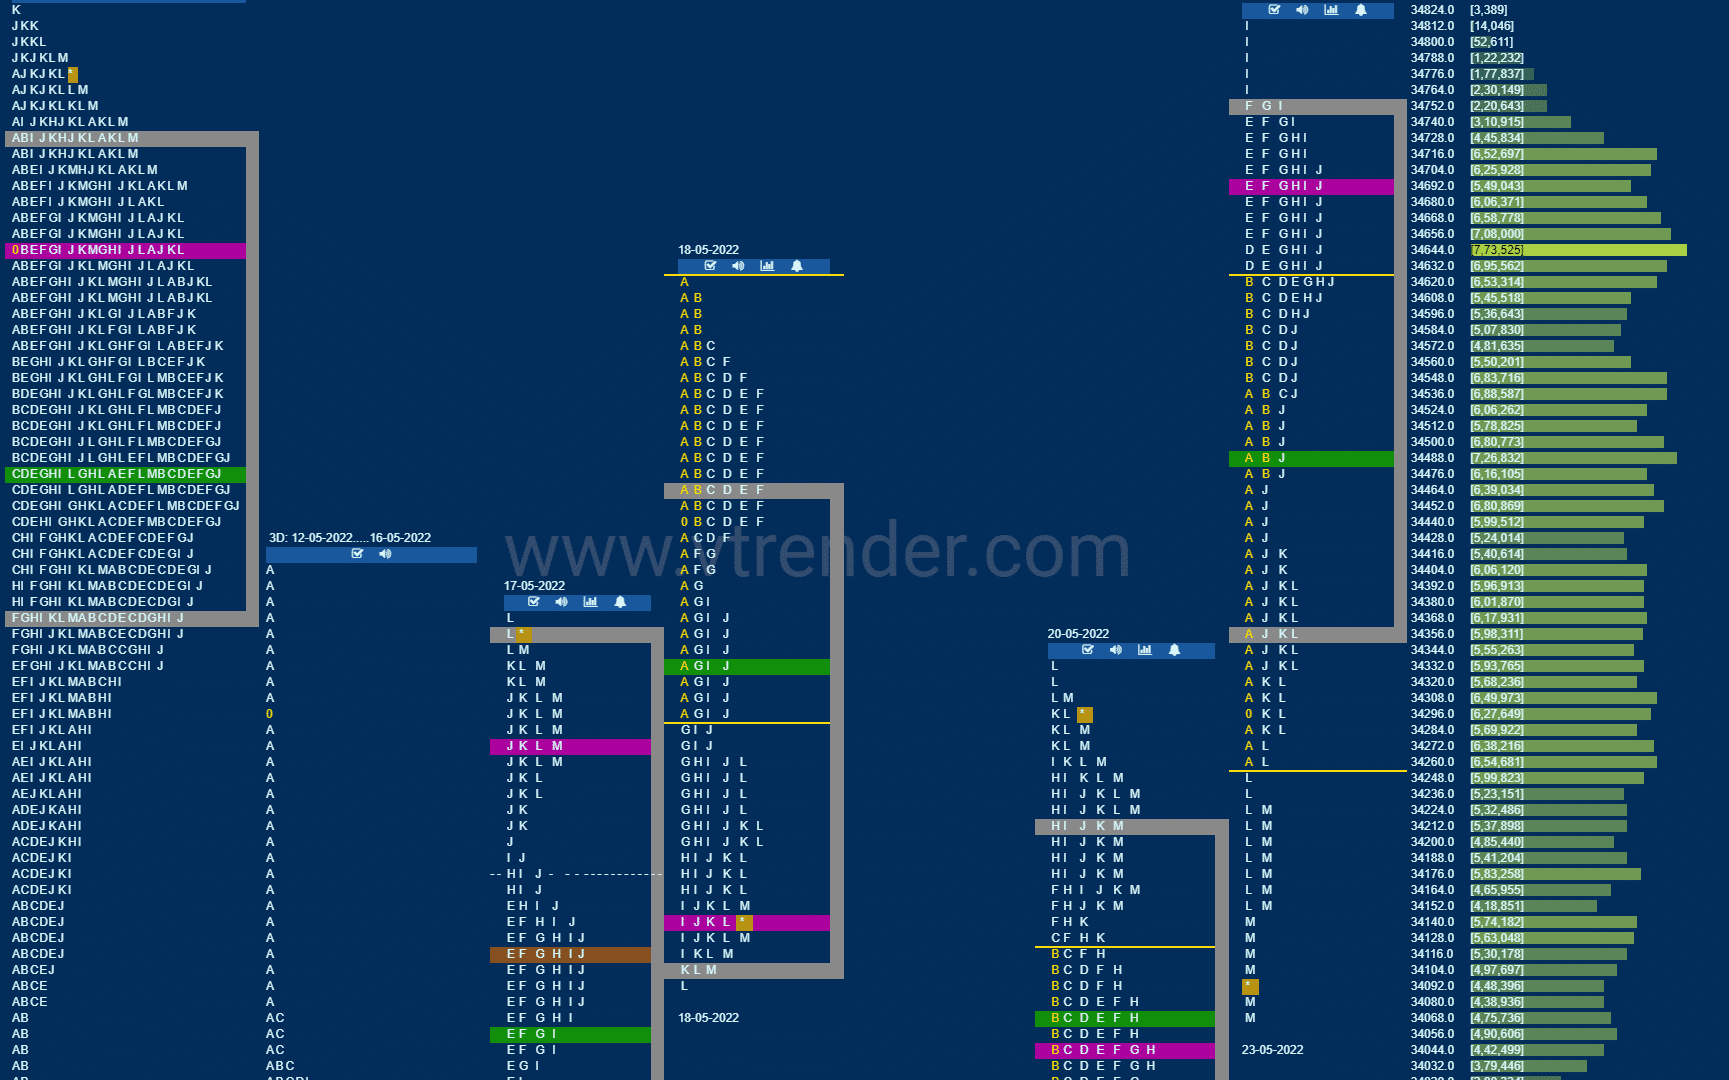 Bnf 15 Market Profile Analysis Dated 23Rd May 2022 Banknifty Futures, Charts, Day Trading, Intraday Trading, Intraday Trading Strategies, Market Profile, Market Profile Trading Strategies, Nifty Futures, Order Flow Analysis, Support And Resistance, Technical Analysis, Trading Strategies, Volume Profile Trading